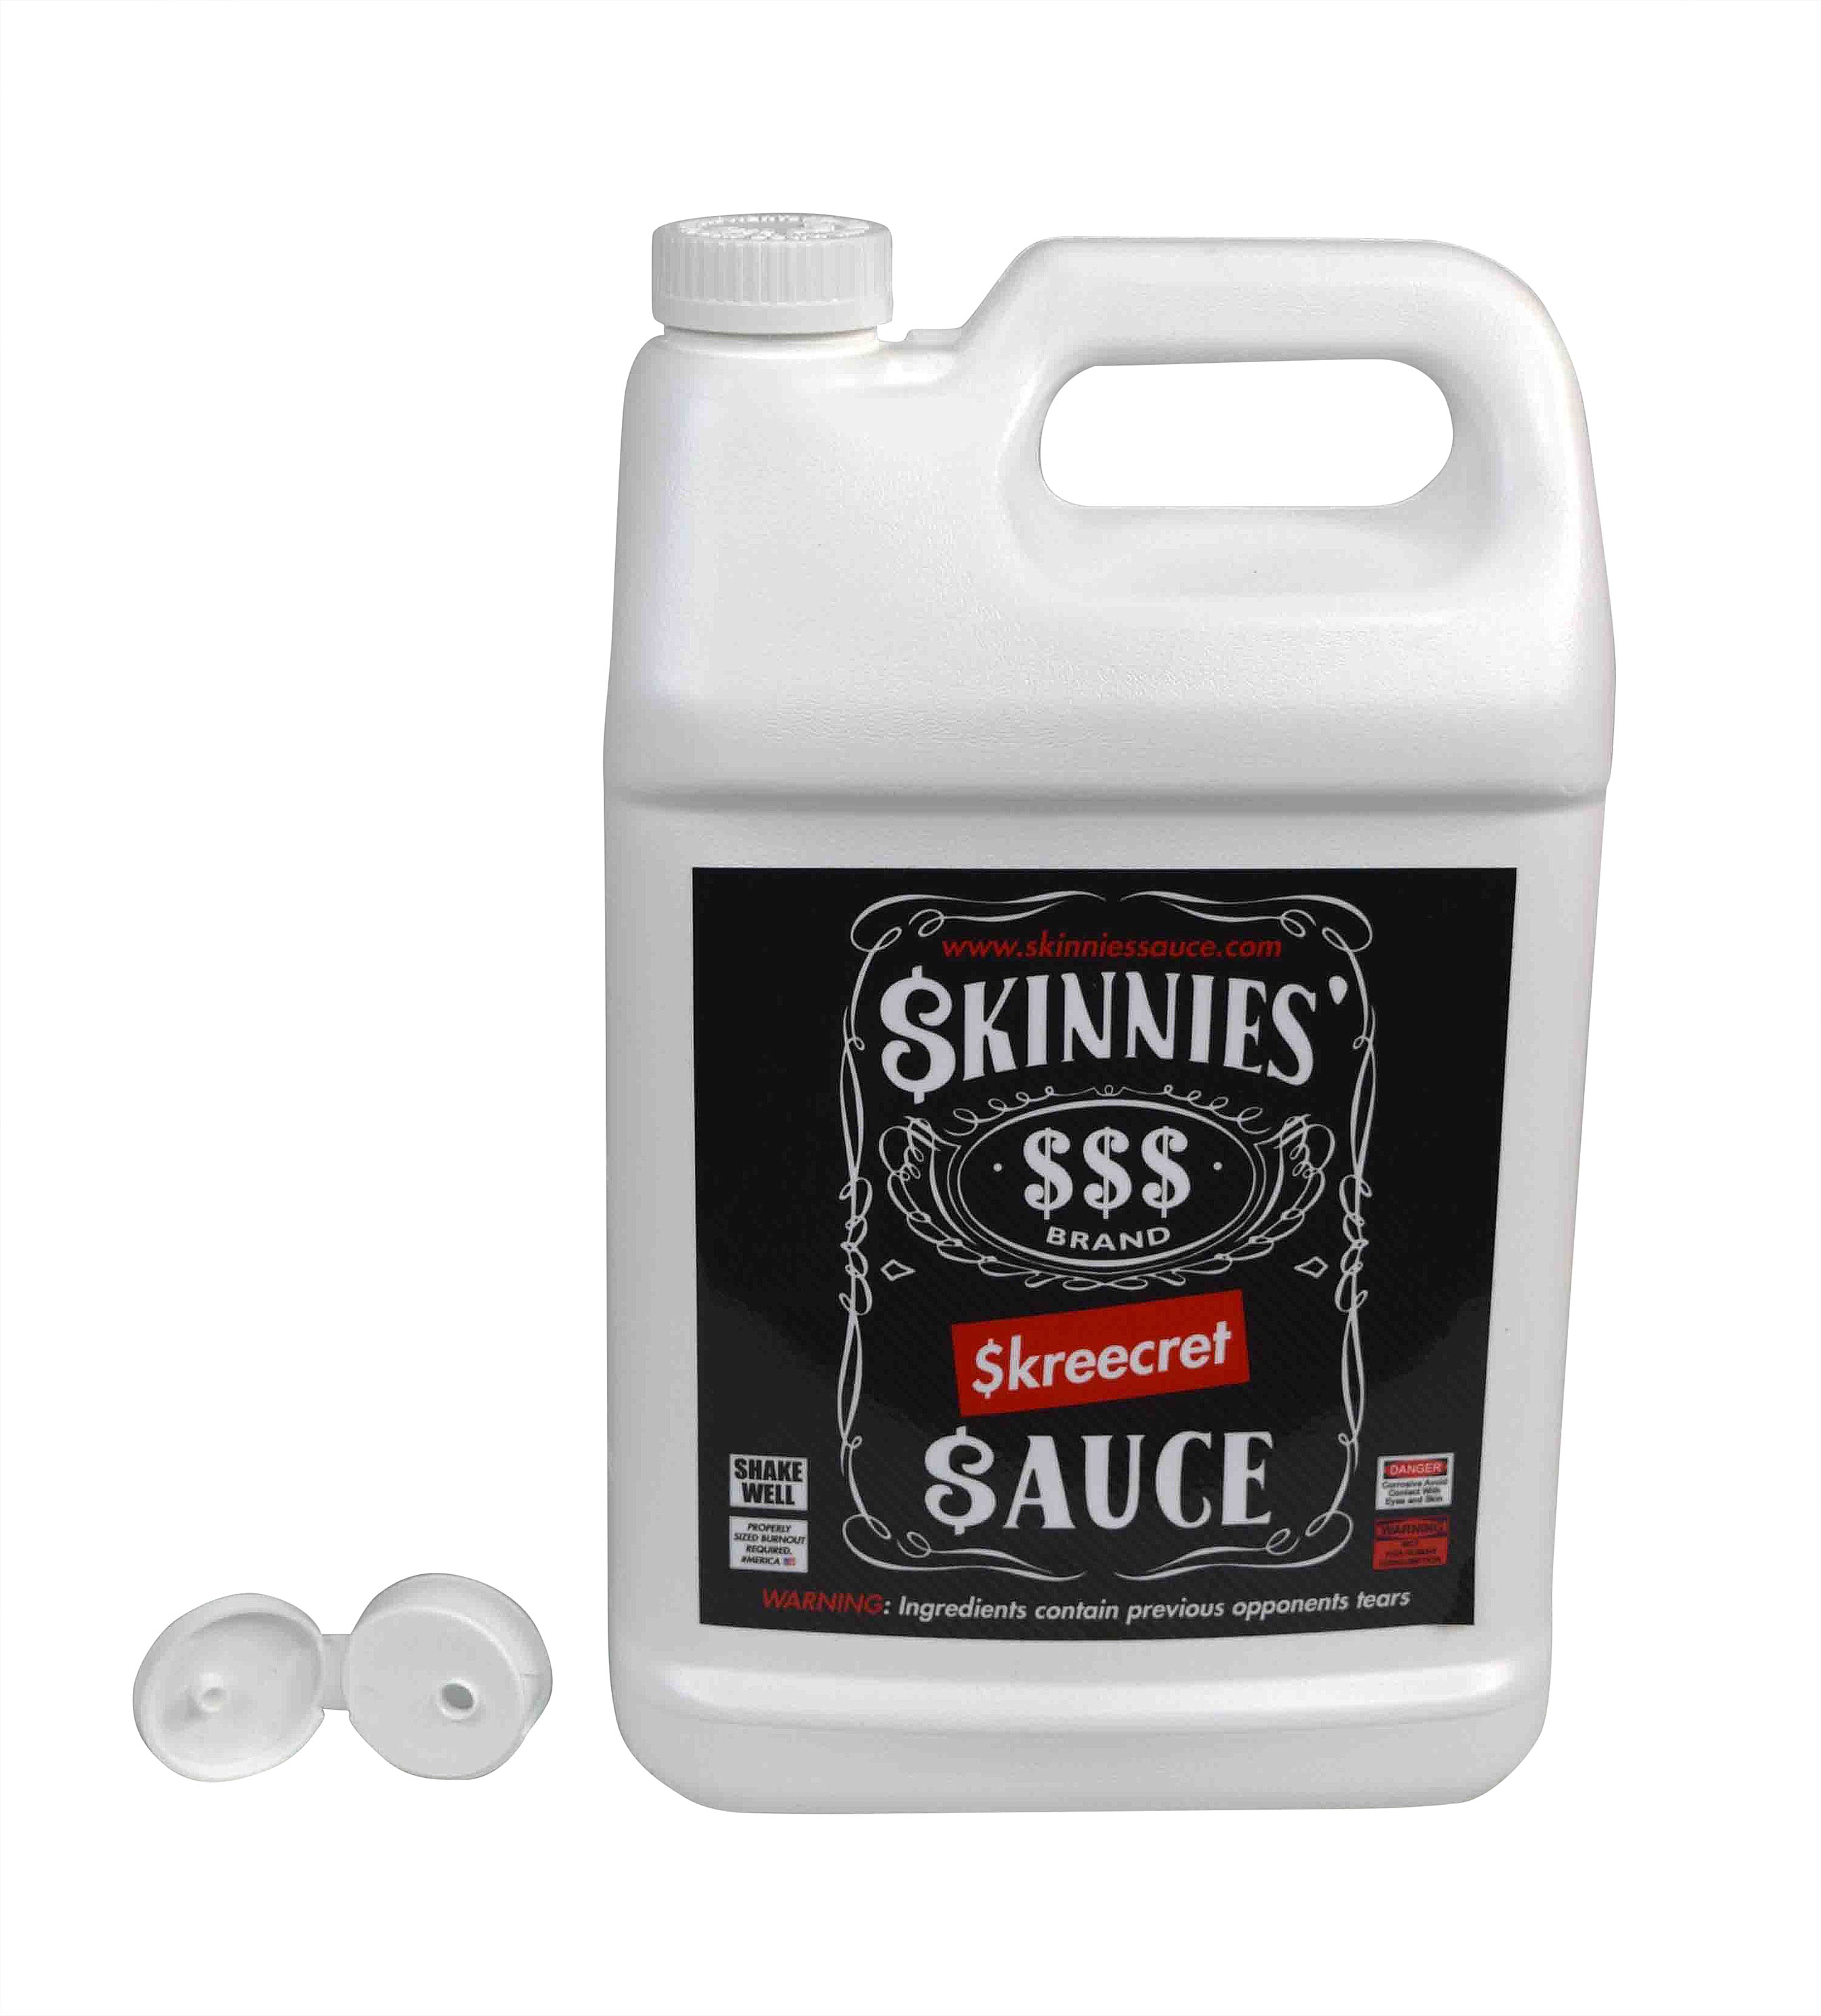 Skinnies-Skreecret-Sauce-No-Prep-Tire-Prep-Traction-Compound-Made-in-USA-image-1